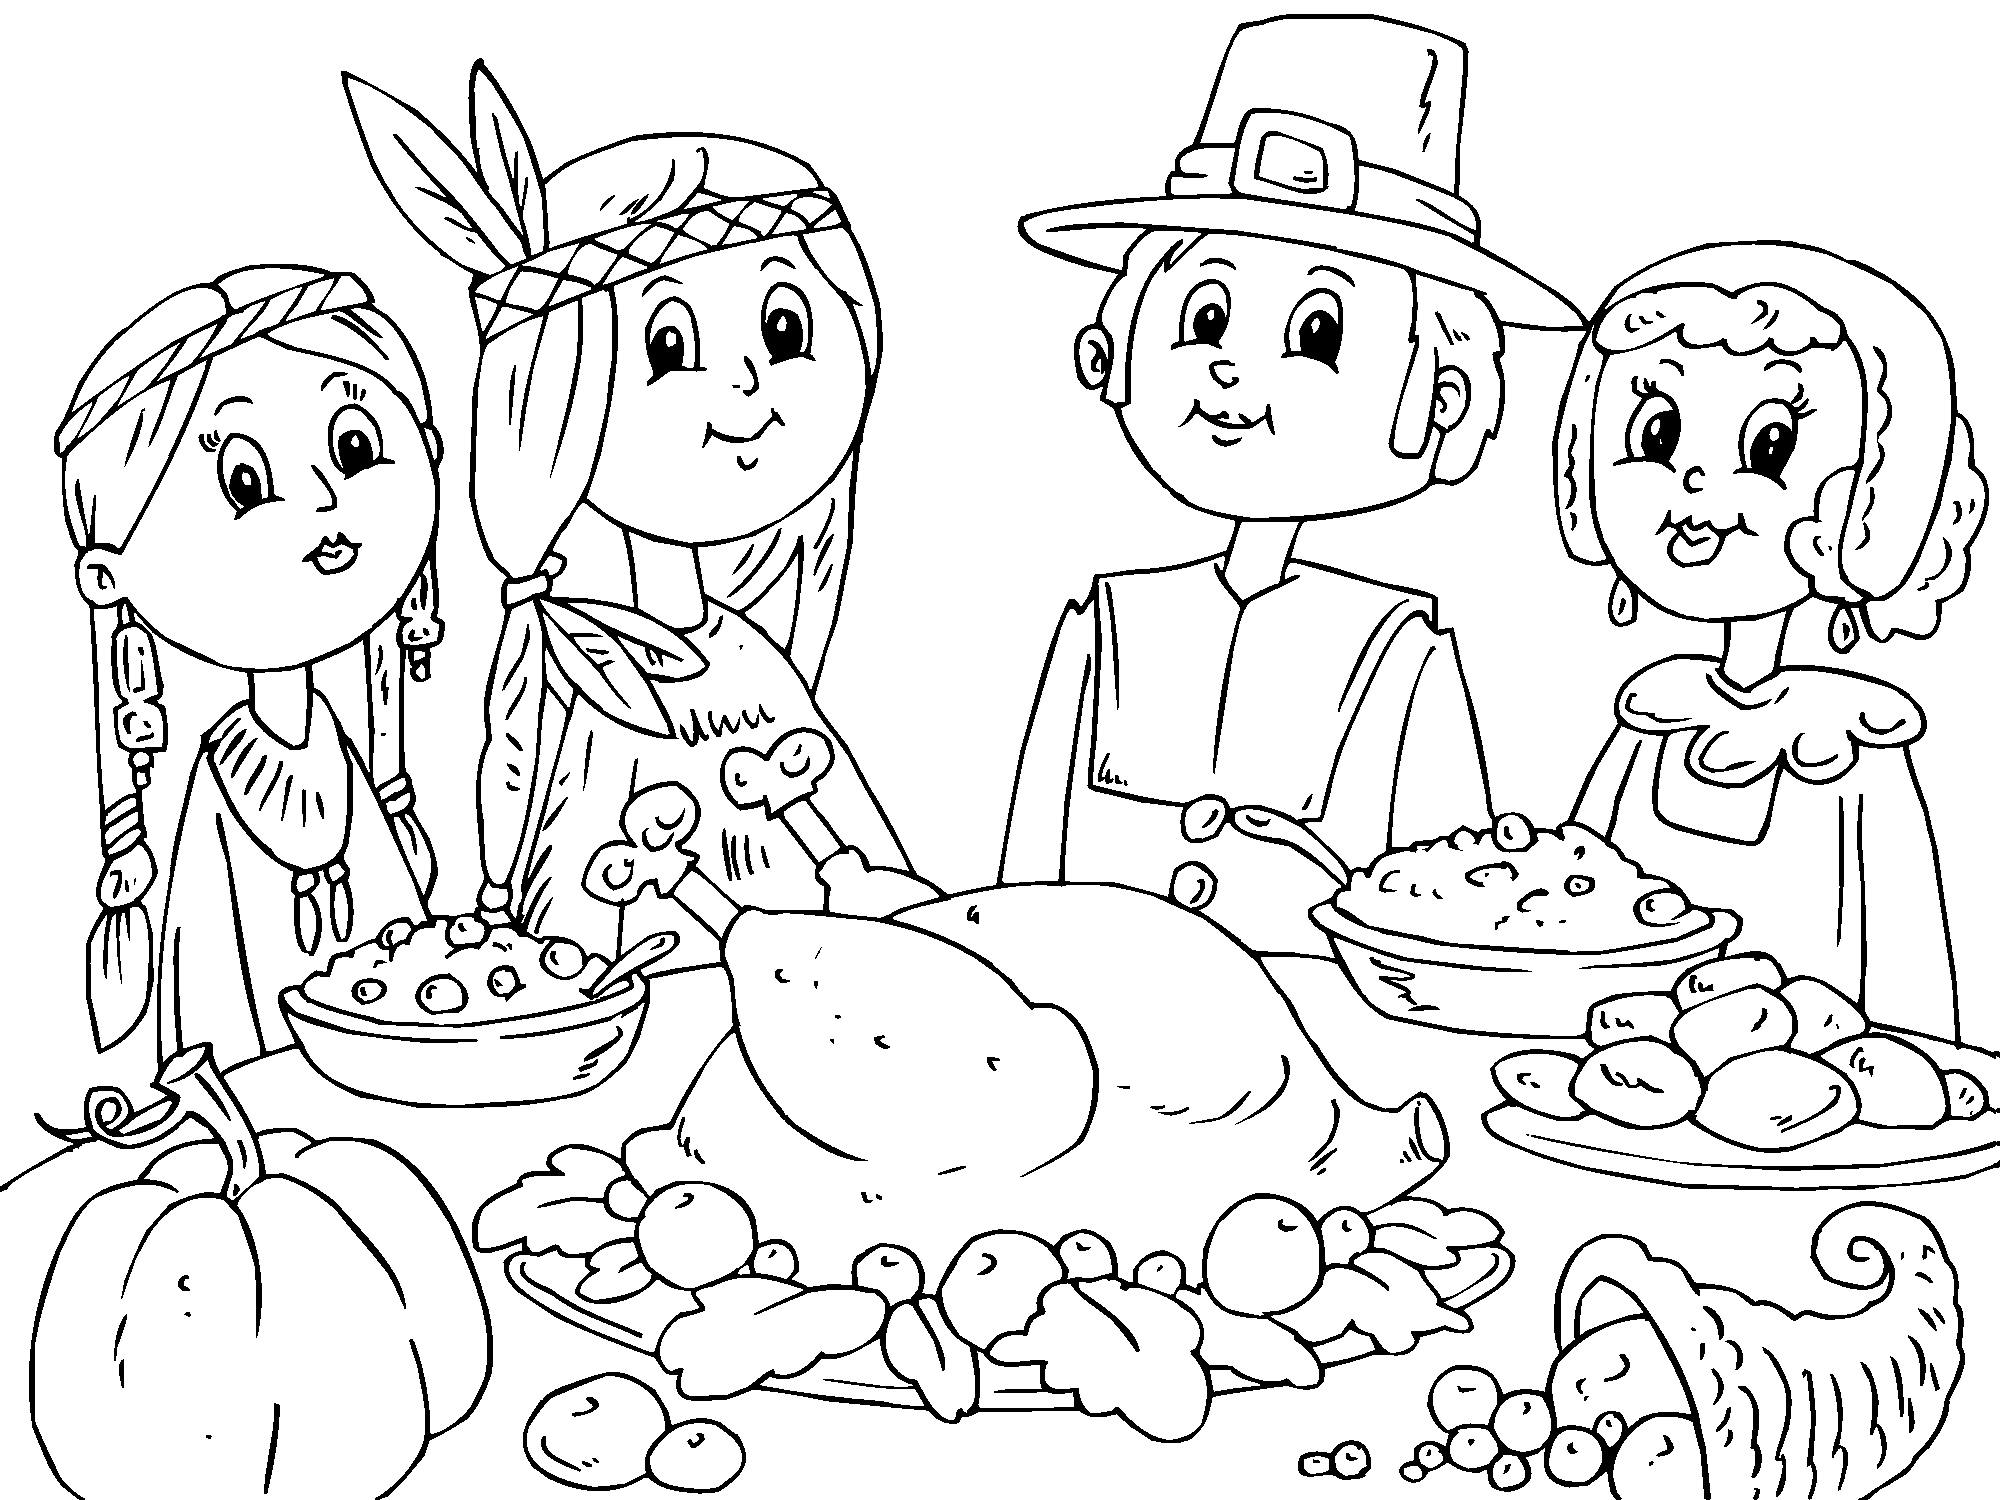 Thanksgiving Day Coloring Pages Free Thanksgiving Day Coloring Pages Crafts And Worksheets For